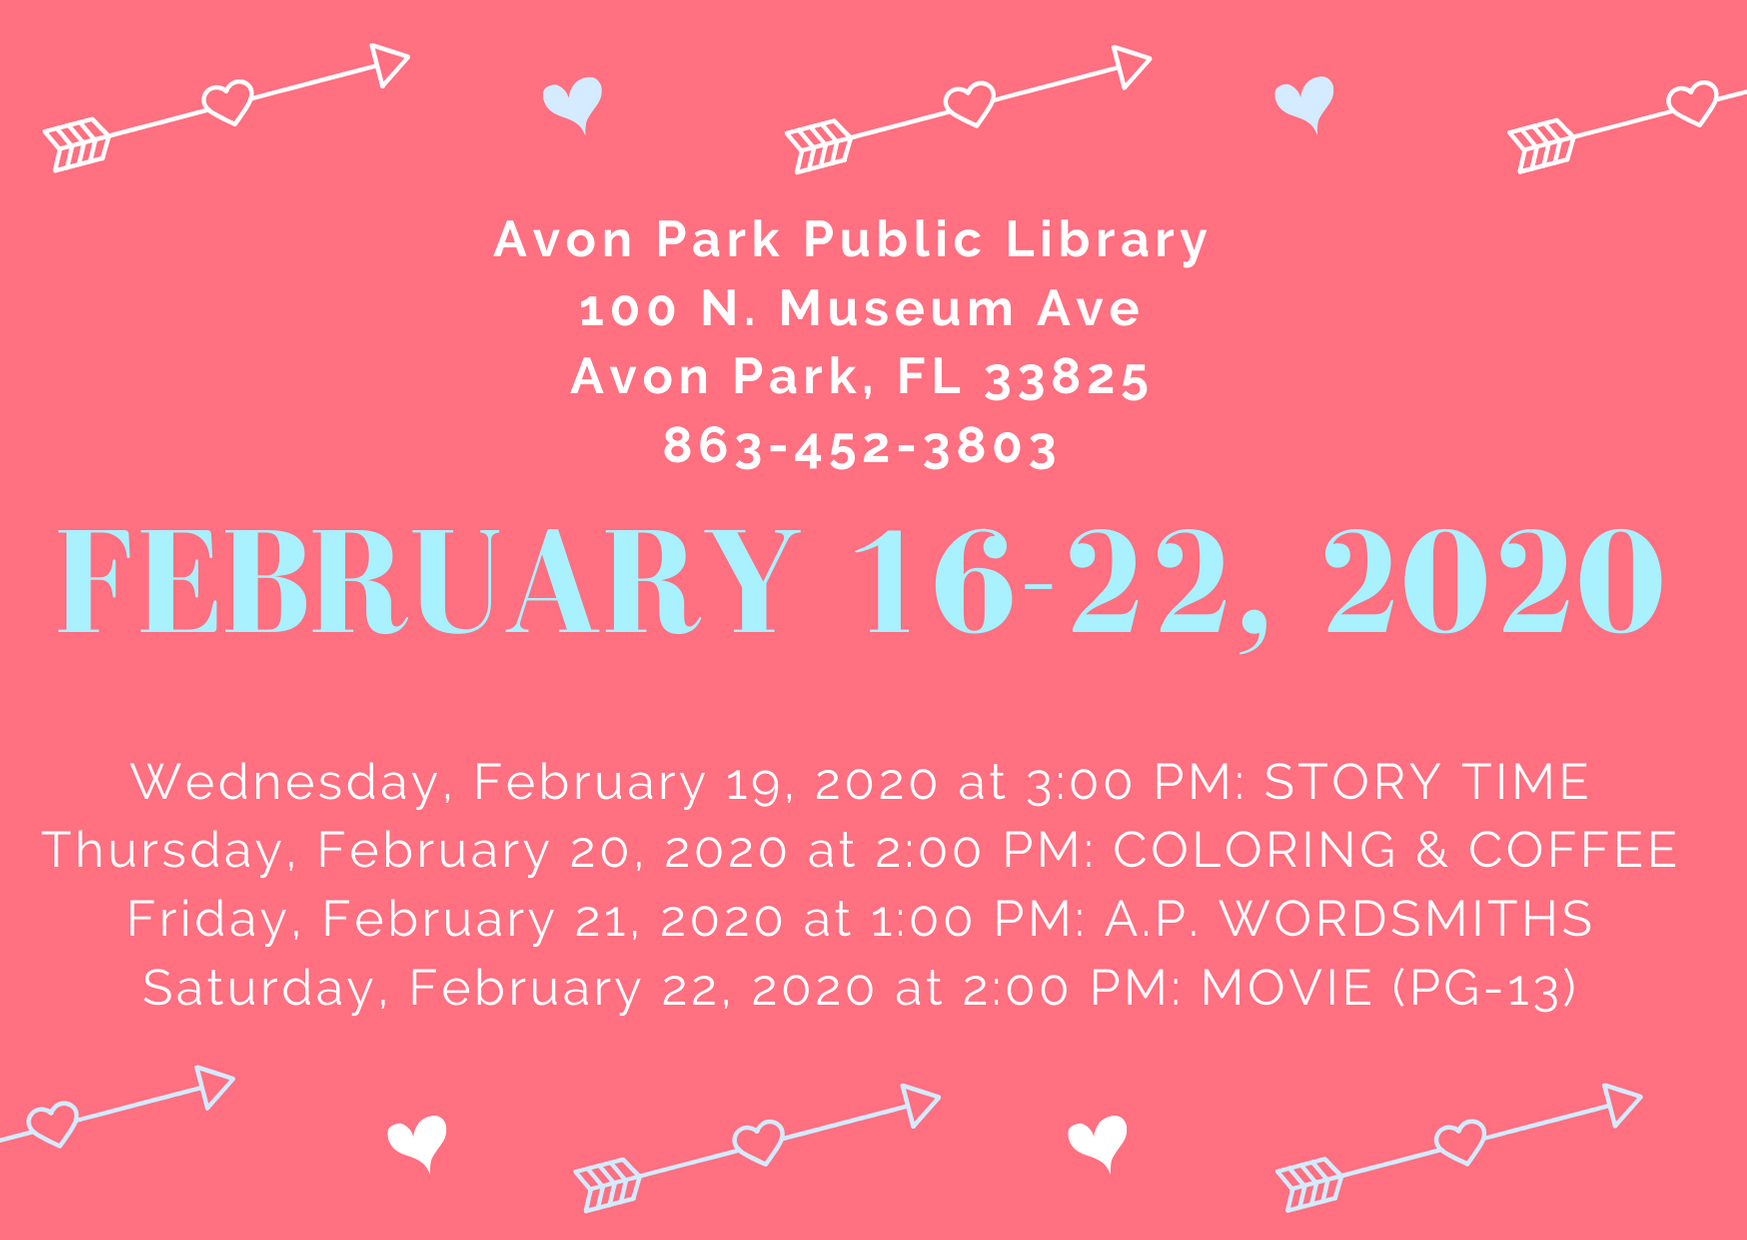 The events for the Avon Park Public Library are as follows: At 3:00 PM on Wednesday, February 19, 2020, Ms. Kim will host story time in the children's area. On Thursday, February 20, 2020, we will have coloring and coffee for adults happening in the meeting room 2:00 PM to 4:00 PM. On Friday, January 21, 2020 at 1:00 PM, the A.P Wordsmiths will be meeting. On Saturday, February 22, 2020 at 2:00 PM, we will be showing a movie (rated PG-13).